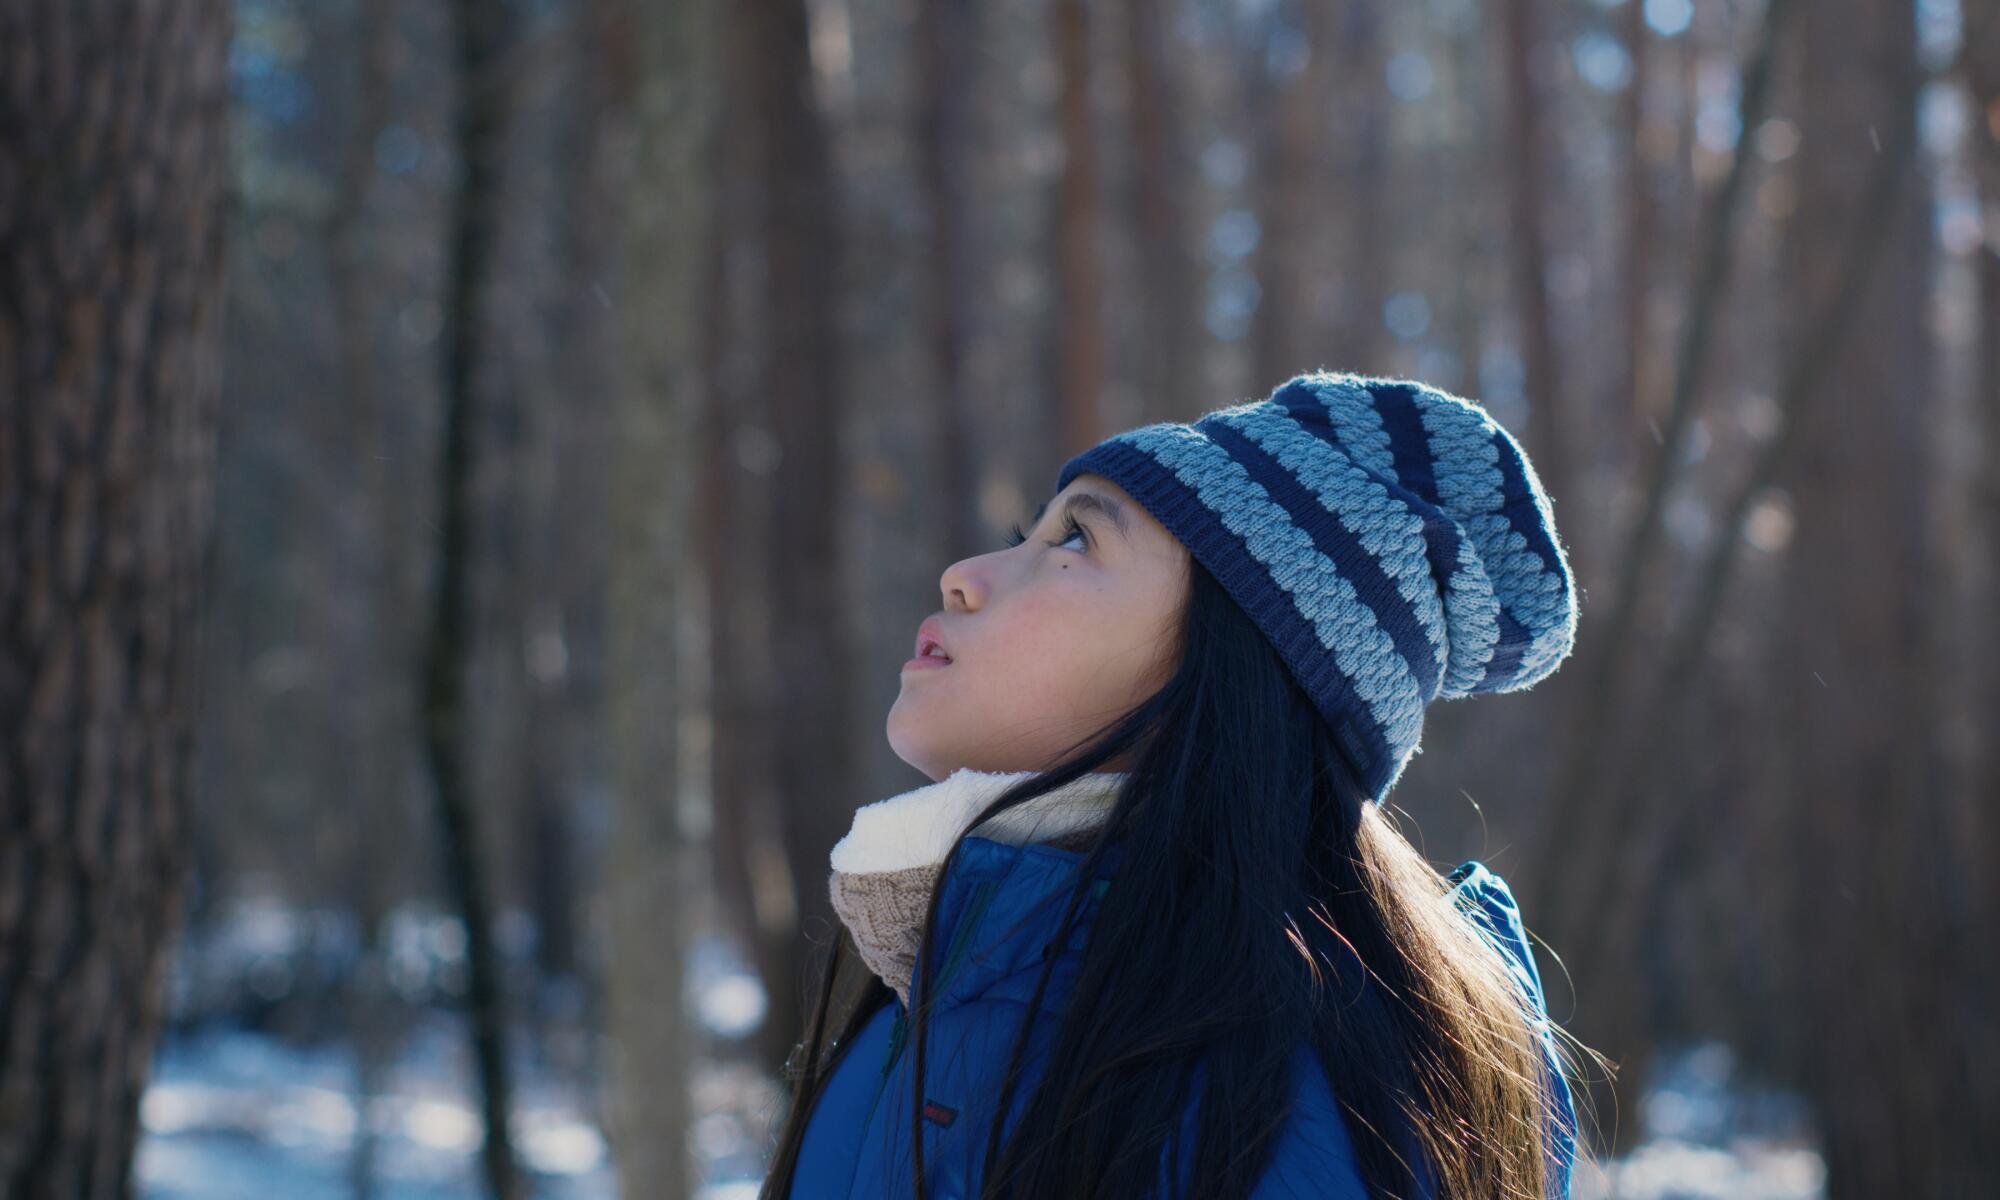 A girl in the woods wearing a knit hat looks up.